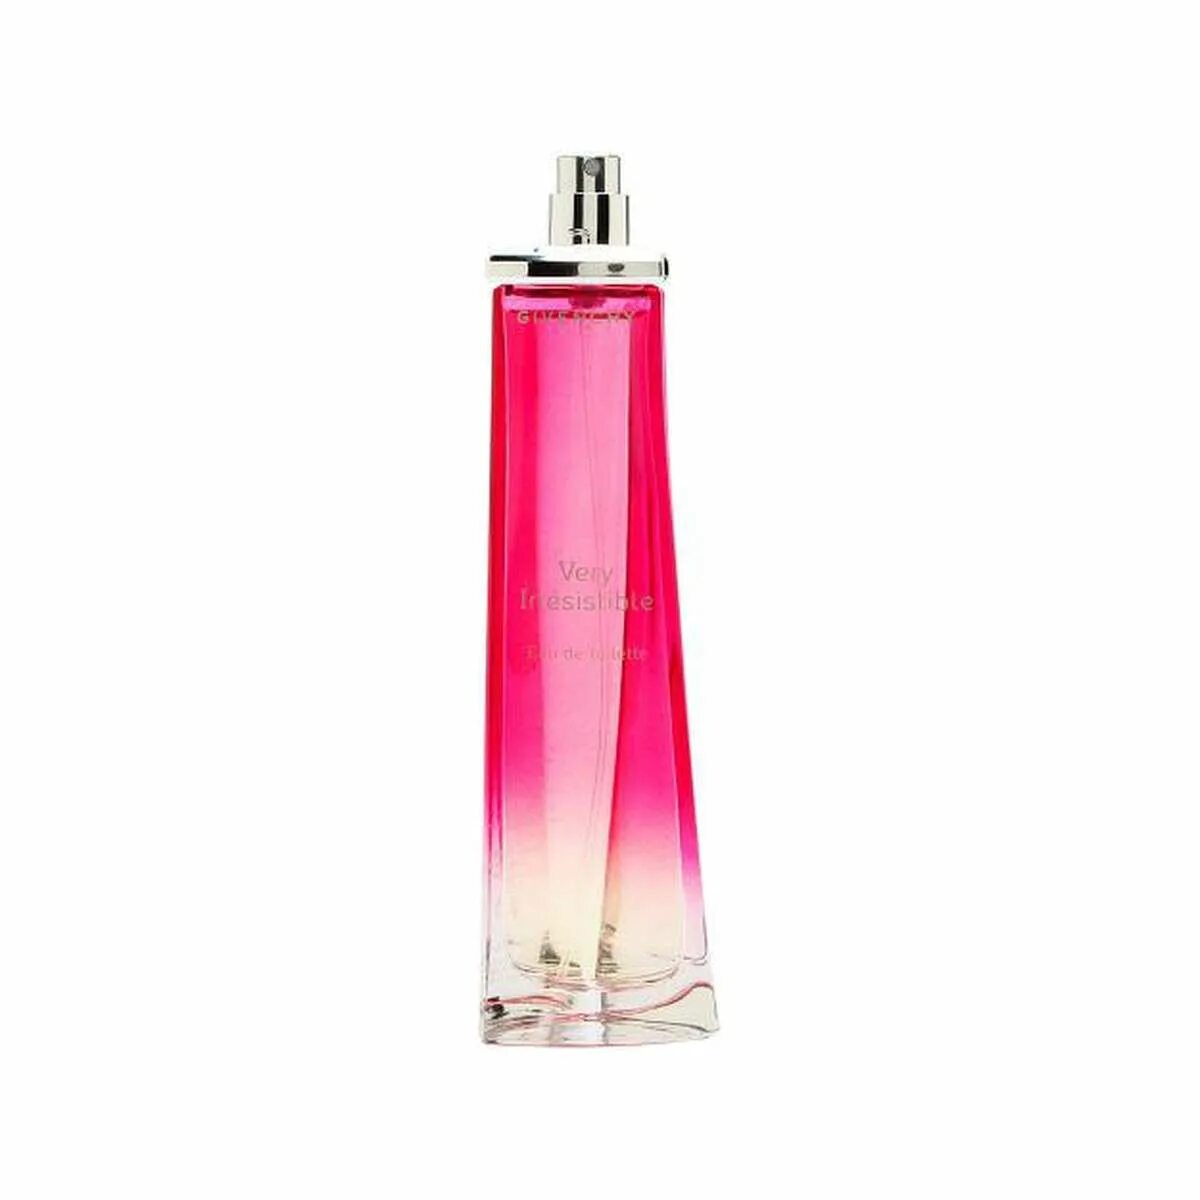 Givenchy very irresistible Lady EDT 50 ml. Туалетная вода Givenchy very irresistible. Givenchy very irresistible woman. Givenchy very irresistible Eau de Toilette туалетная вода 75мл. Туалетная вода very